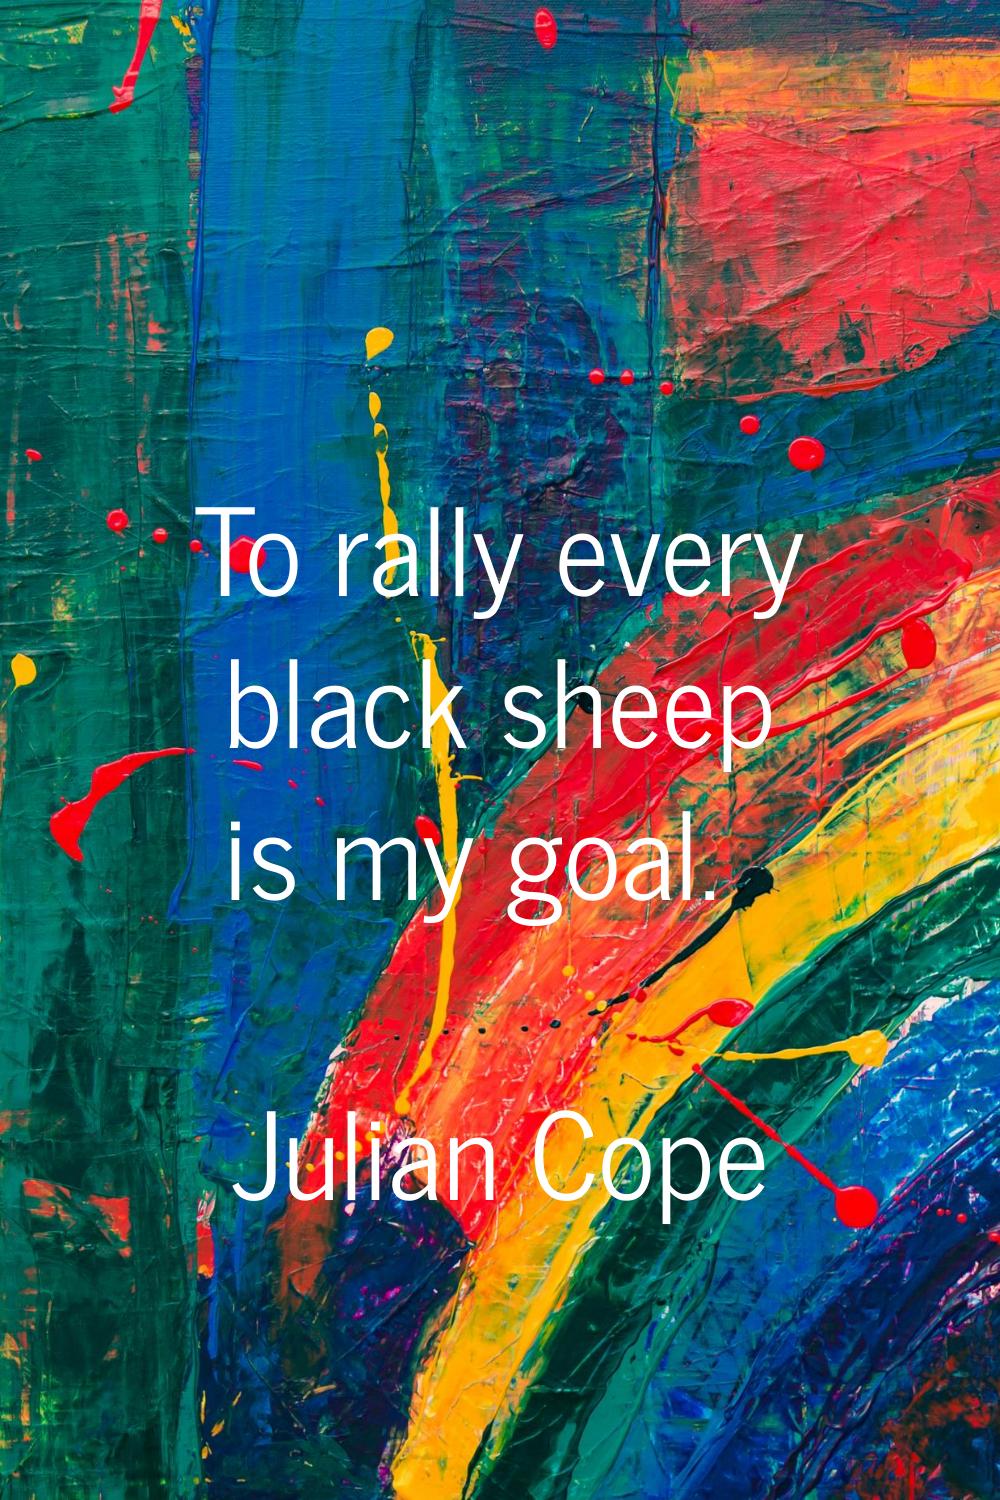 To rally every black sheep is my goal.